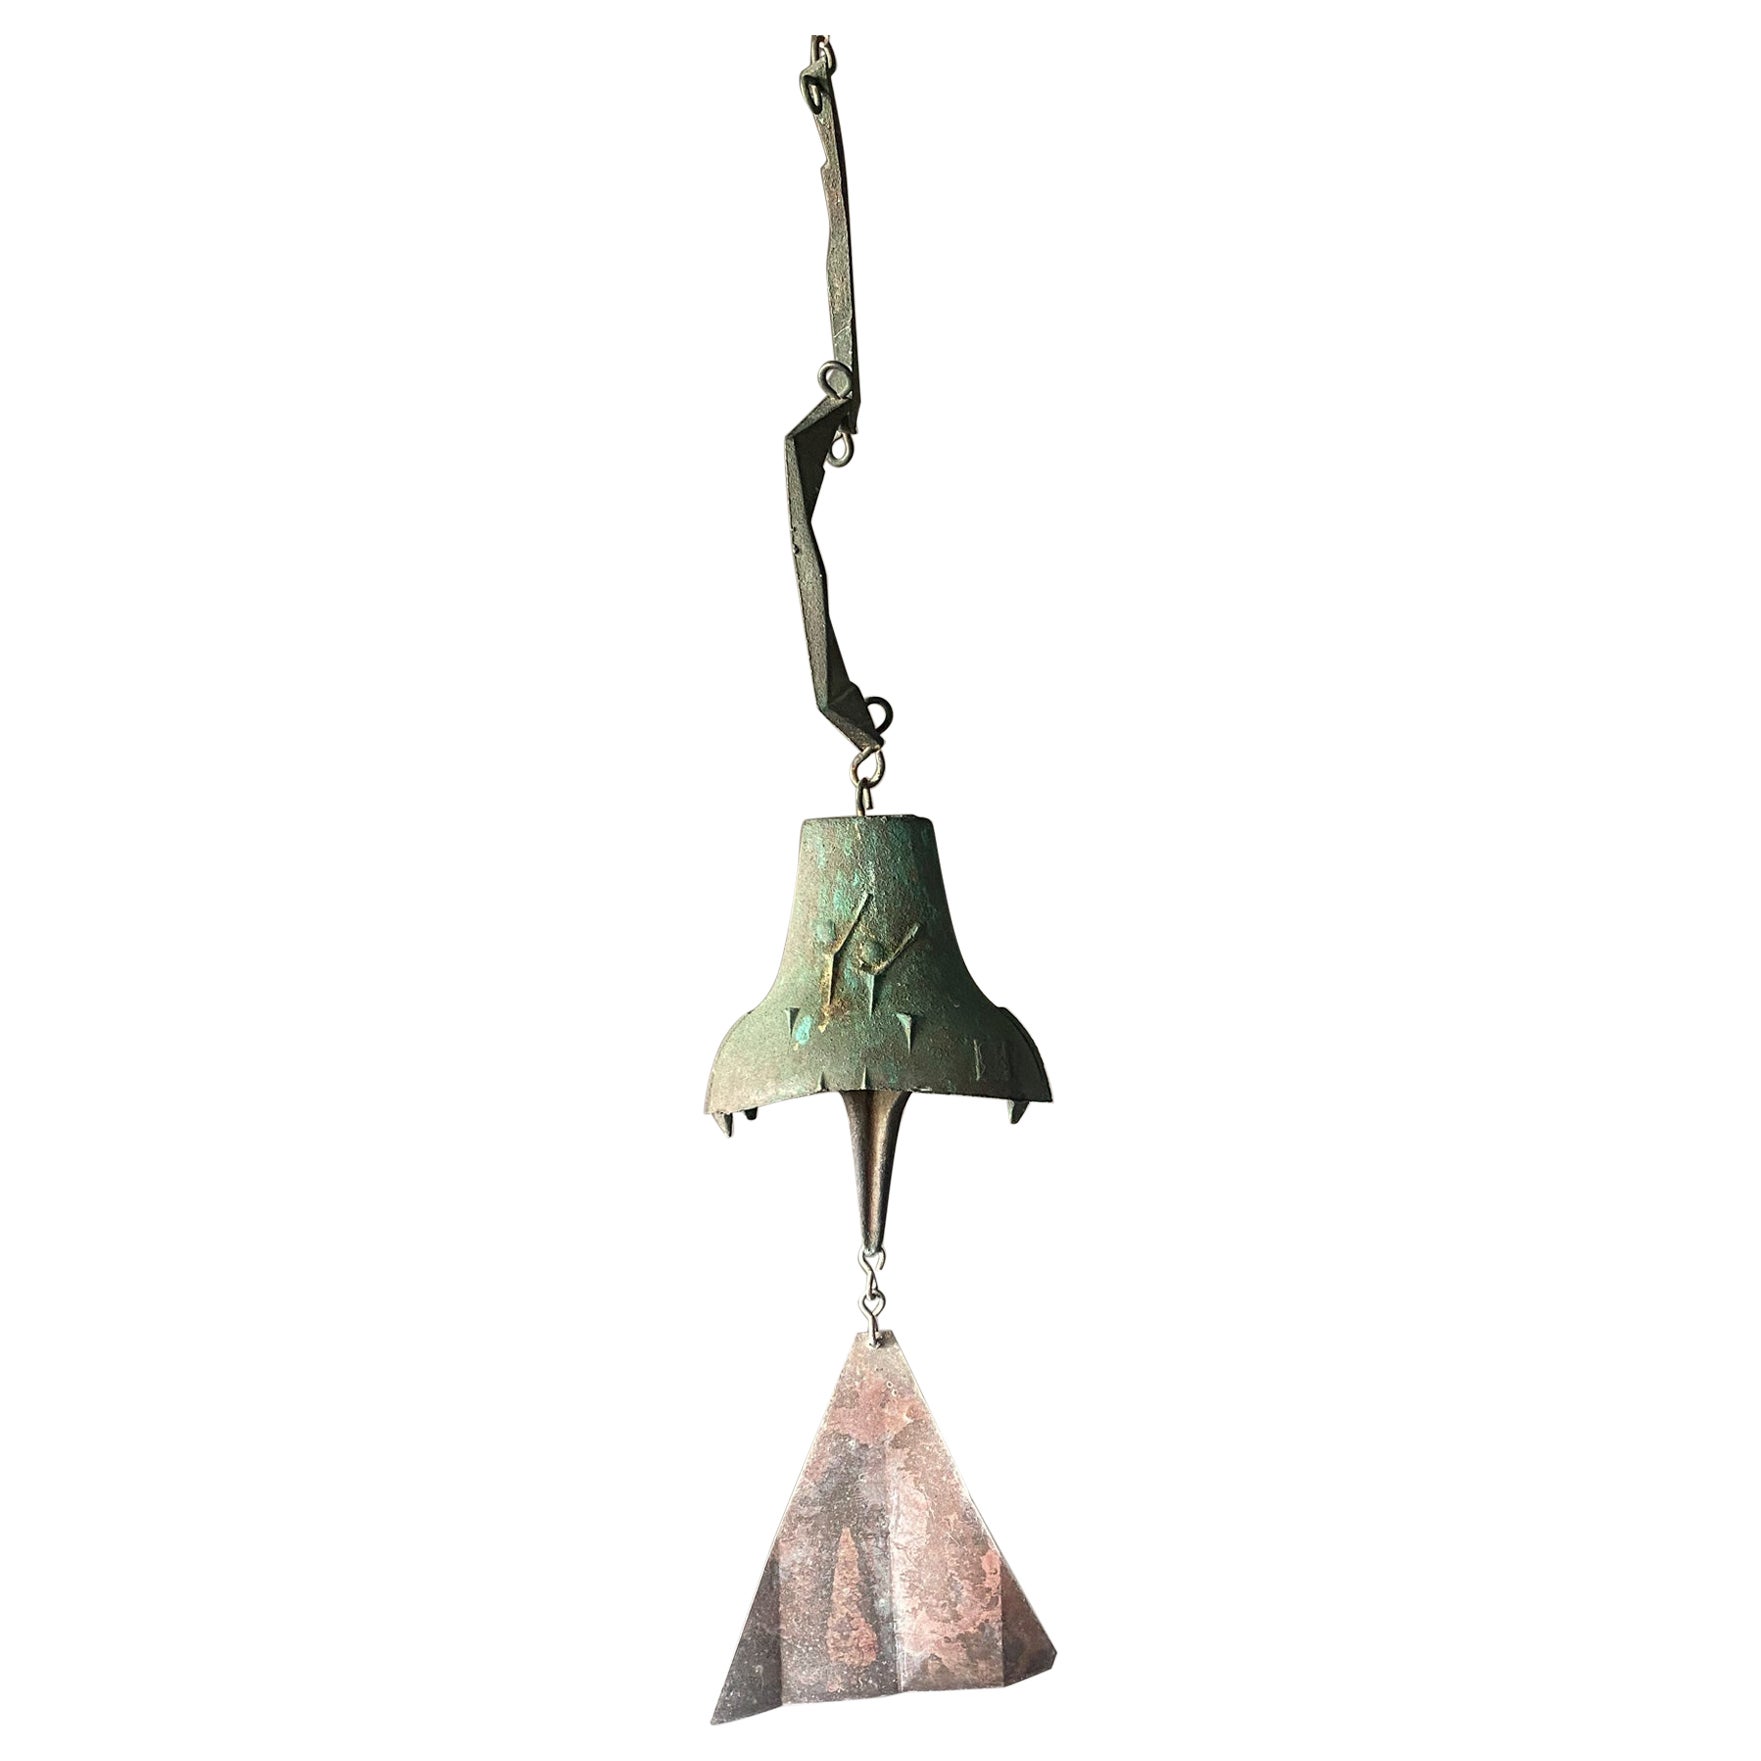 Paolo Soleri Bronze Wind Chime / Bell for Cosanti, 1970's 